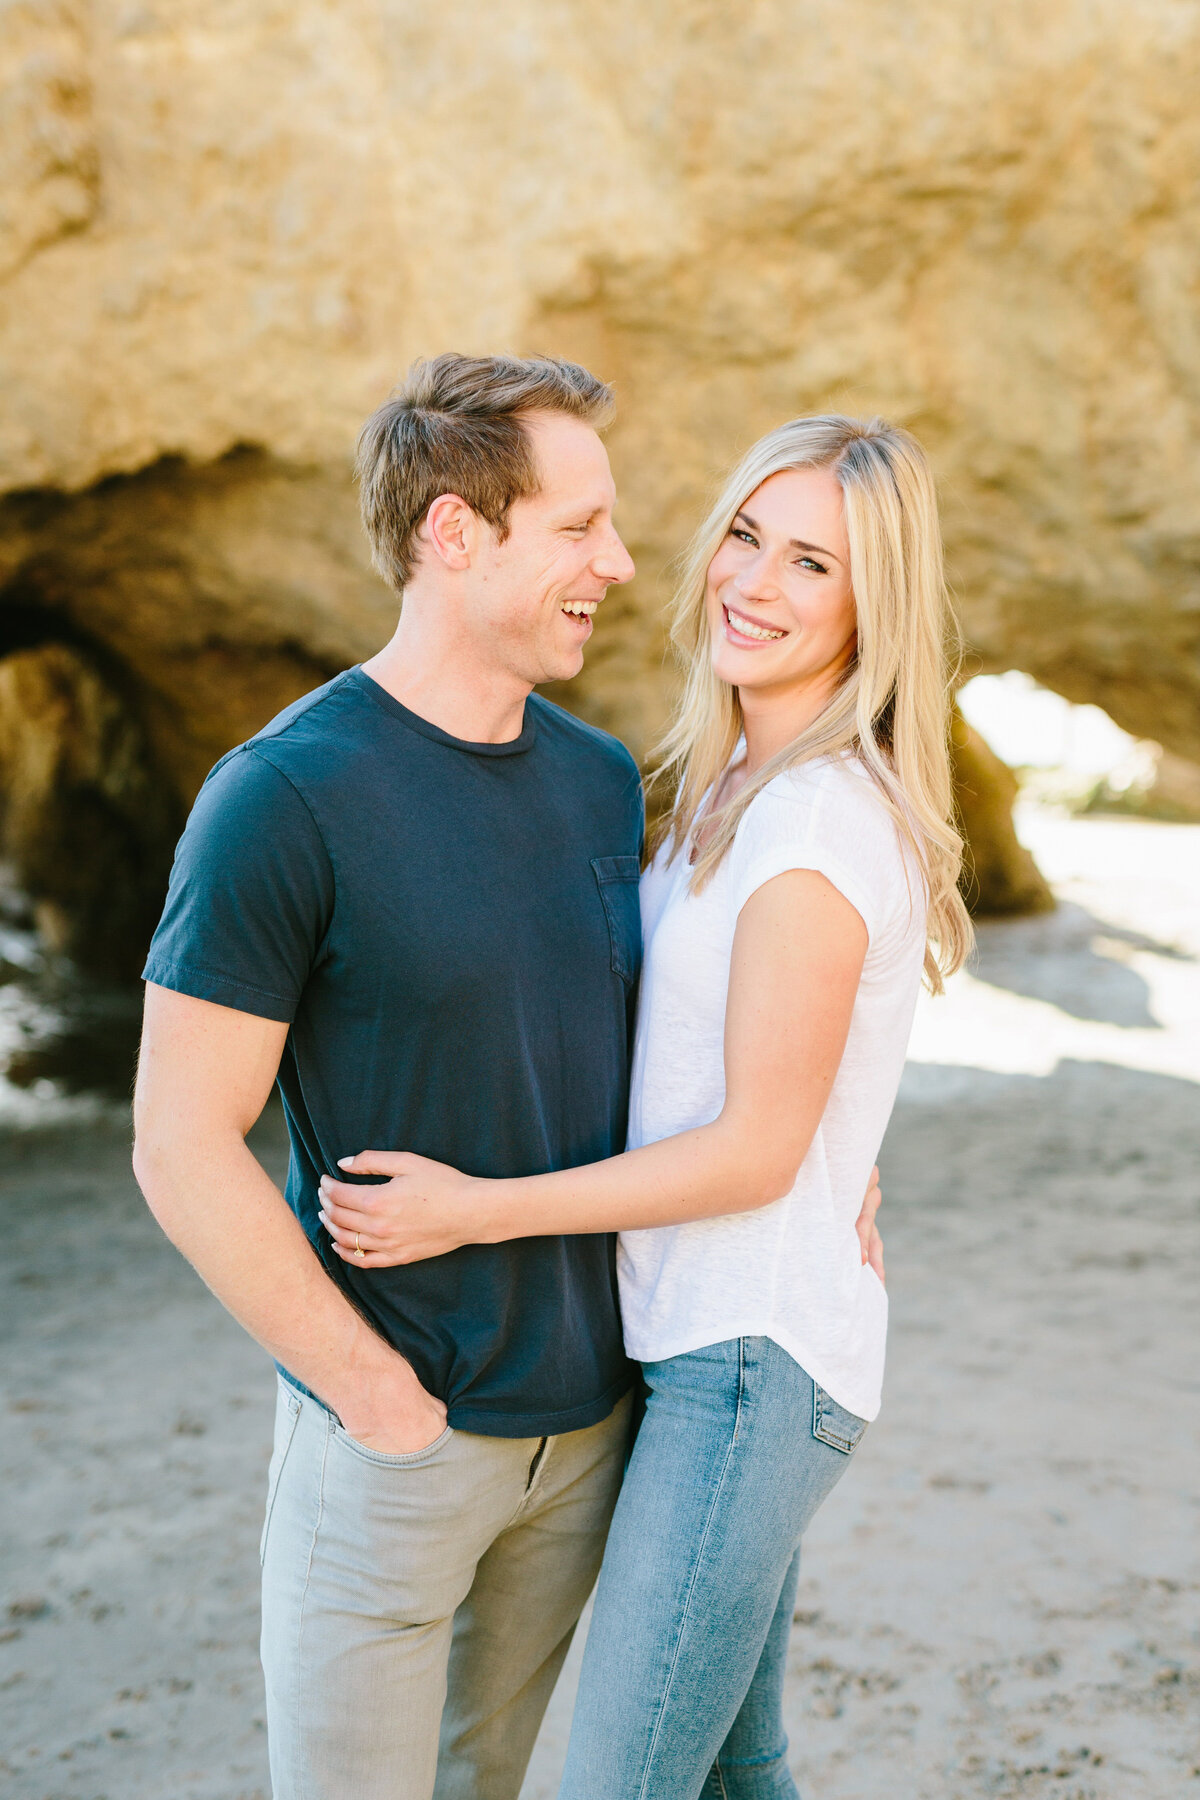 Best California and Texas Engagement Photographer-Jodee Debes Photography-259